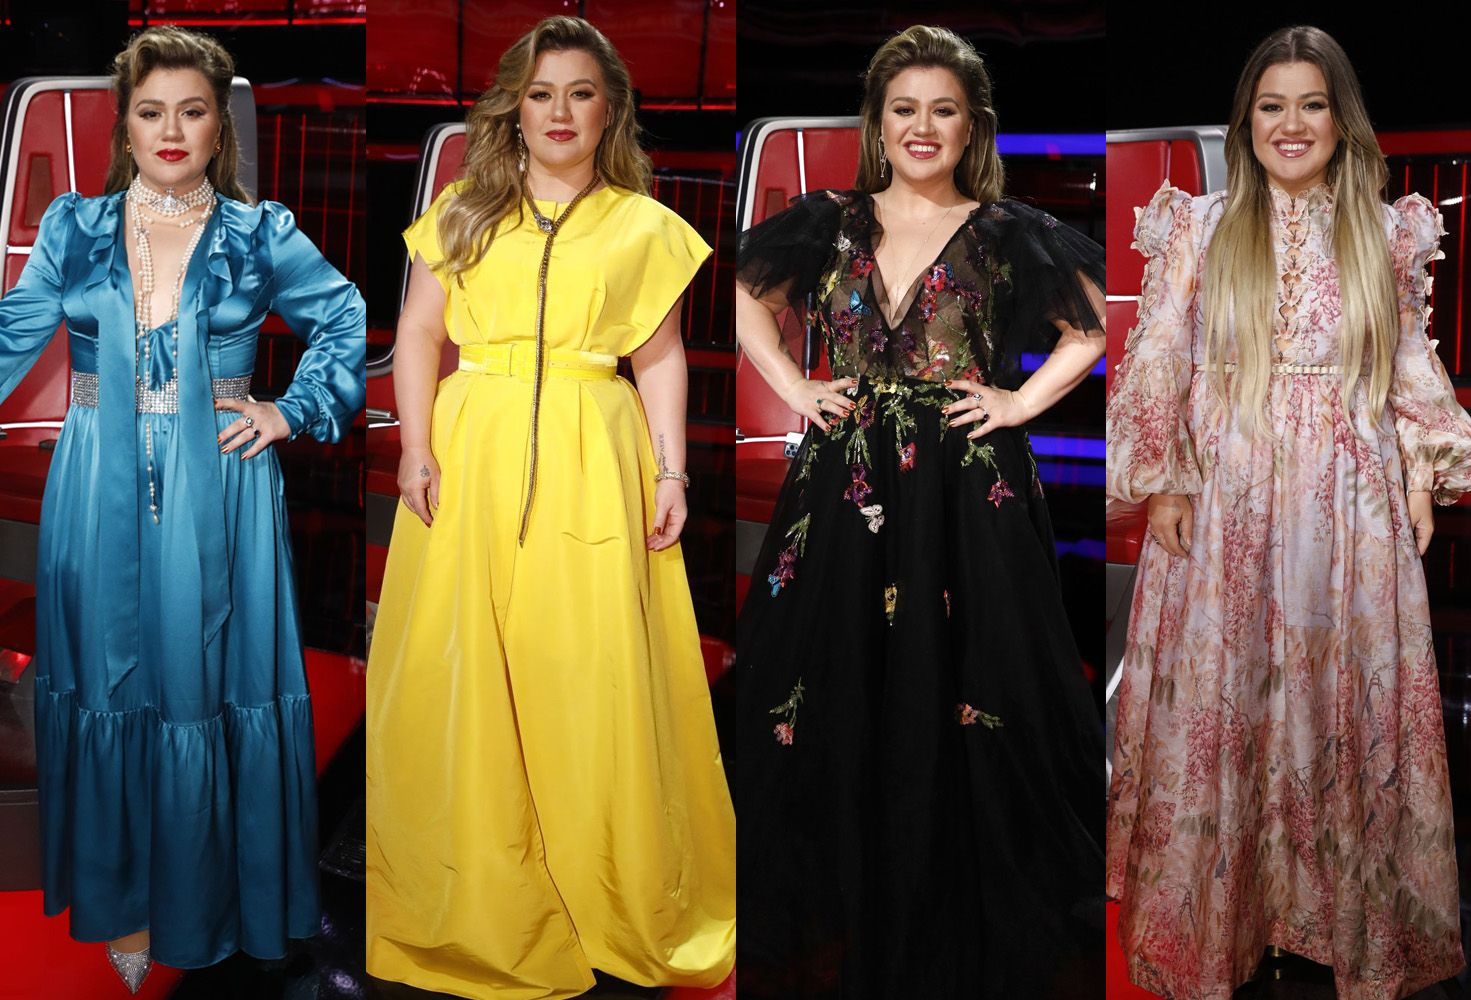 Kelly Clarkson's Best Outfits on 'The Voice